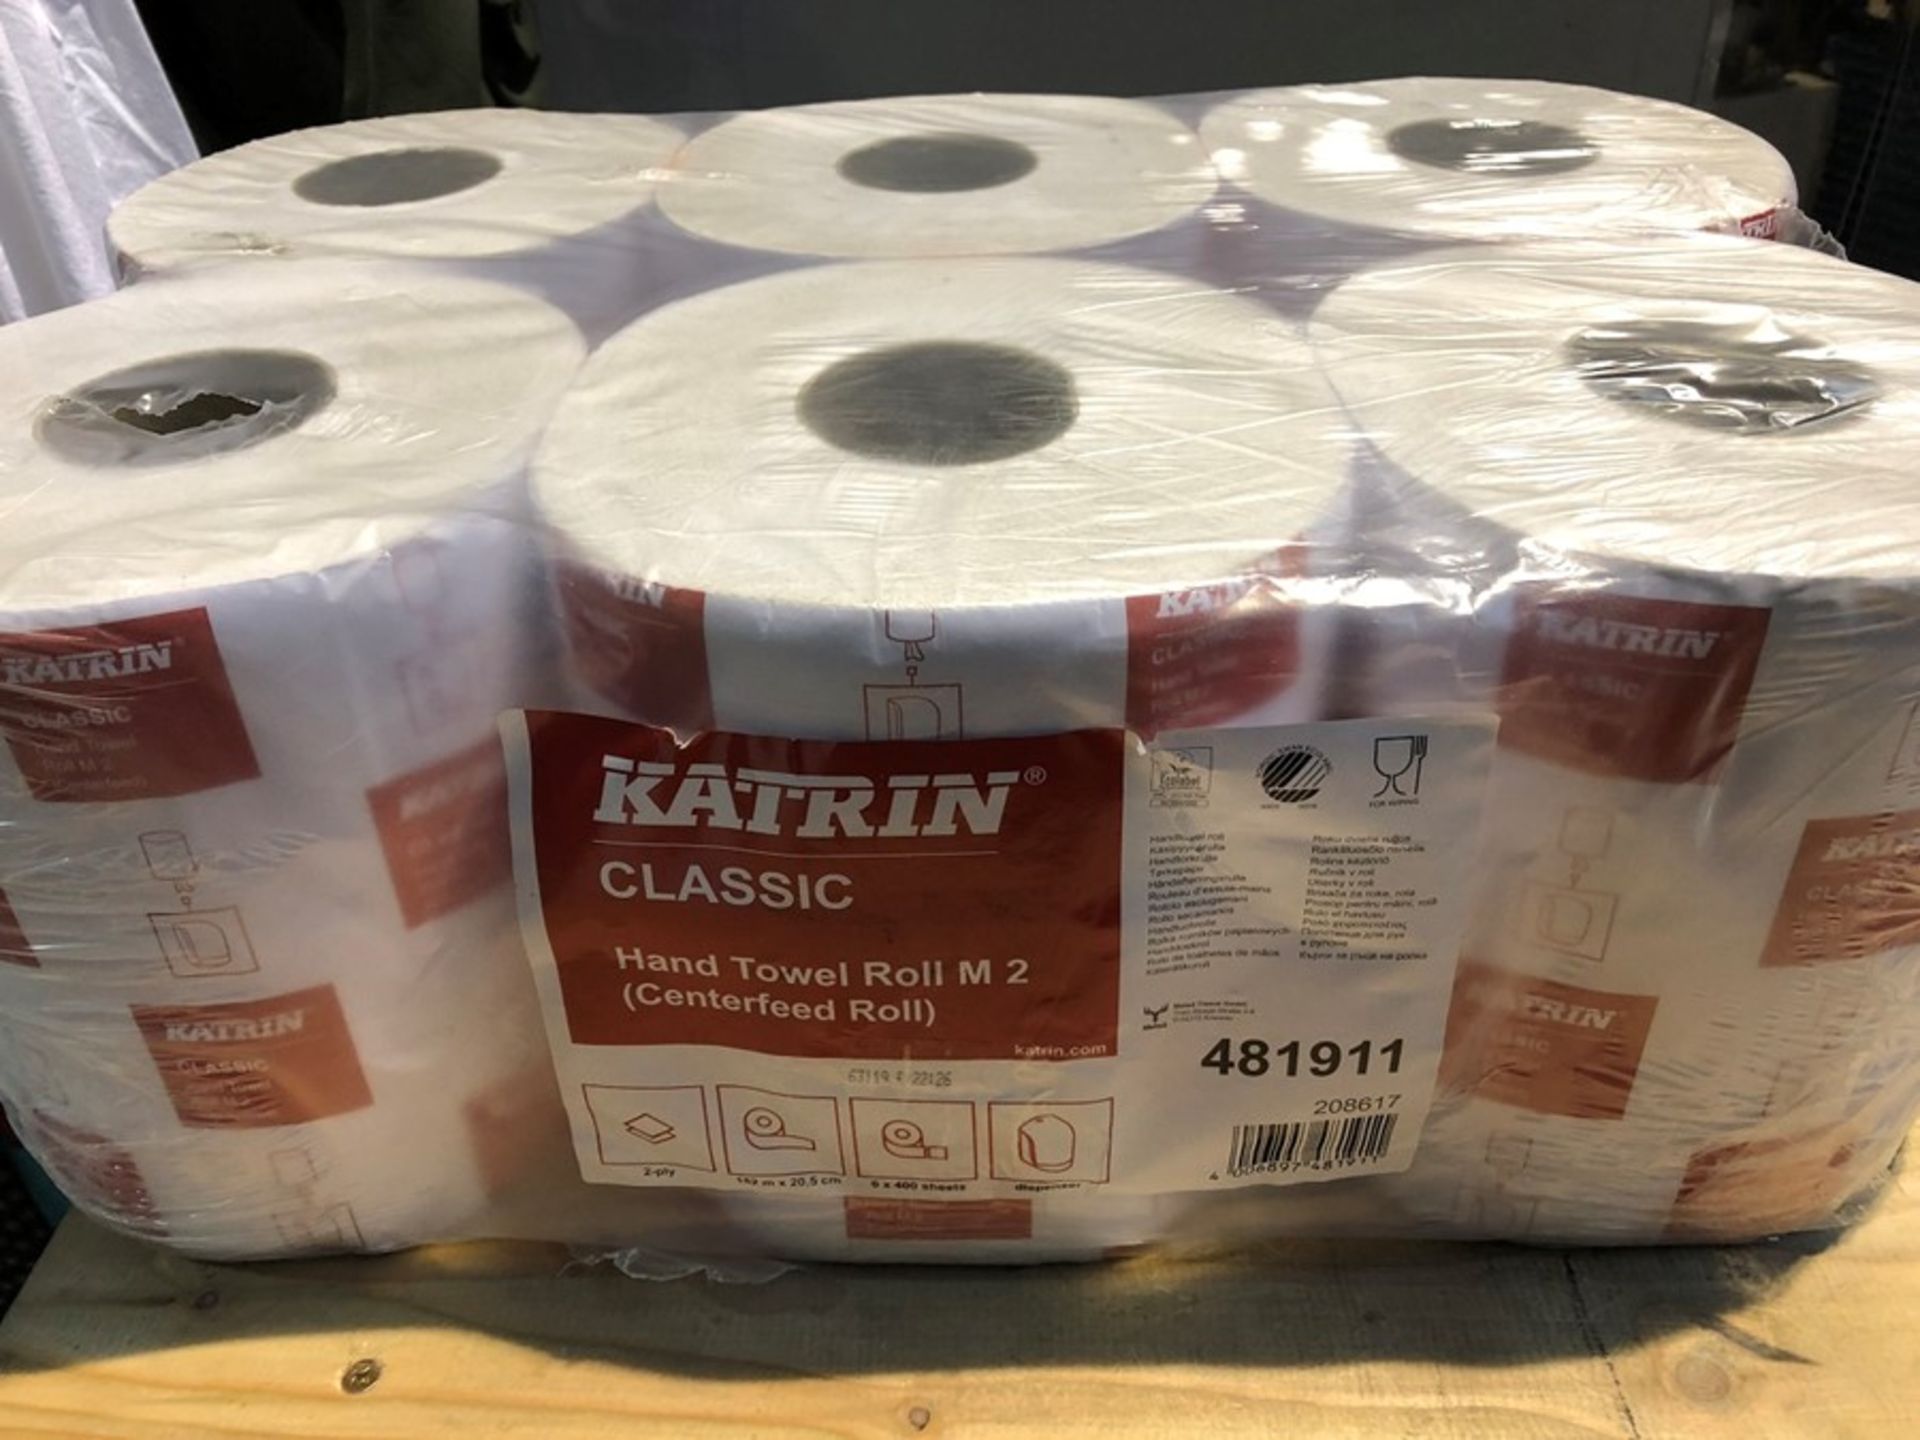 1 BAGGED 6 LARGE PACK OF KATRIN HAND TOWELS IN WHITE - PN - 894 (PUBLIC VIEWING AVAILABLE)